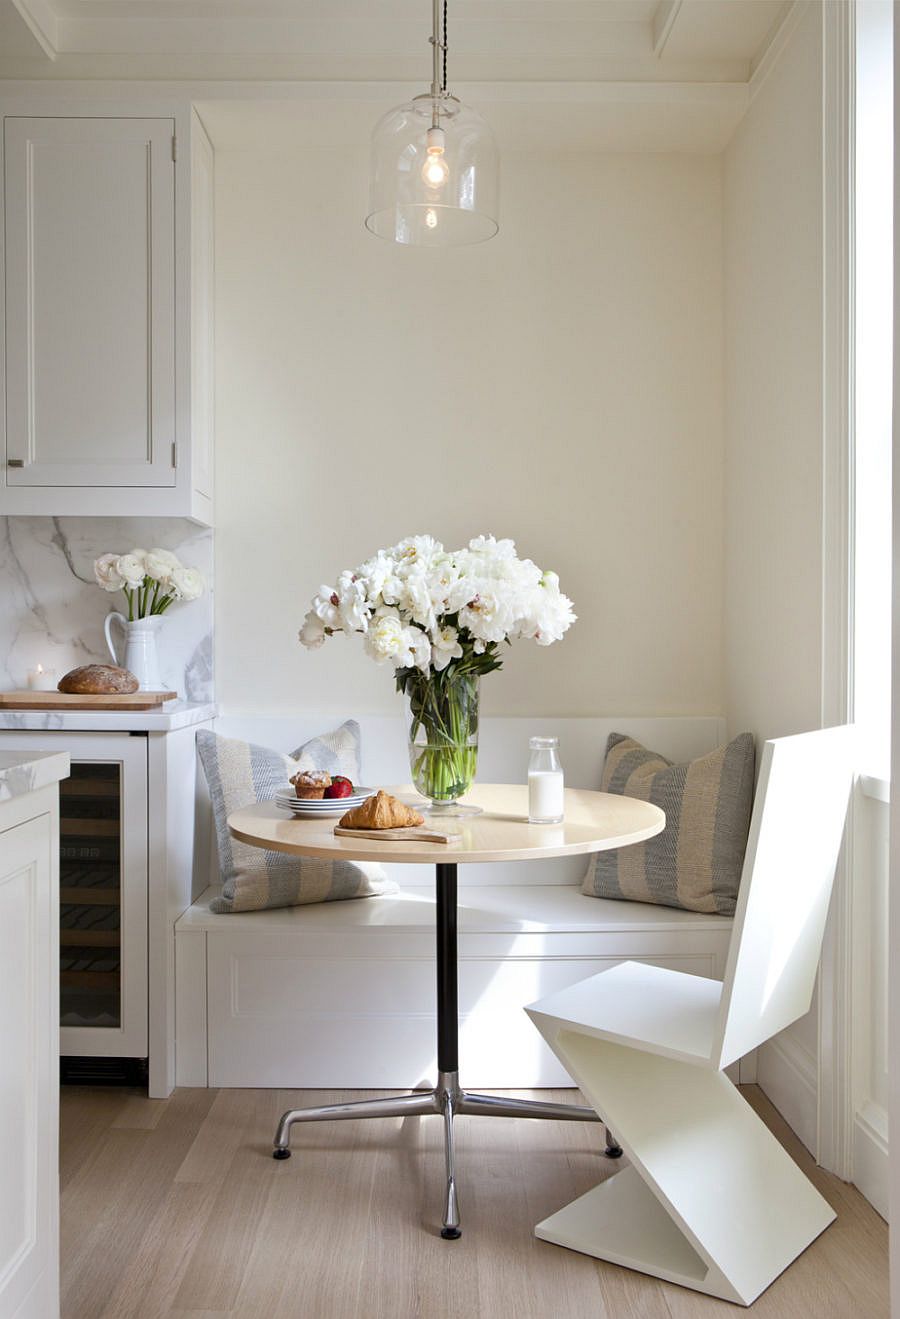 Elegant-and-chic-breakfast-nook-is-a-great-space-saver